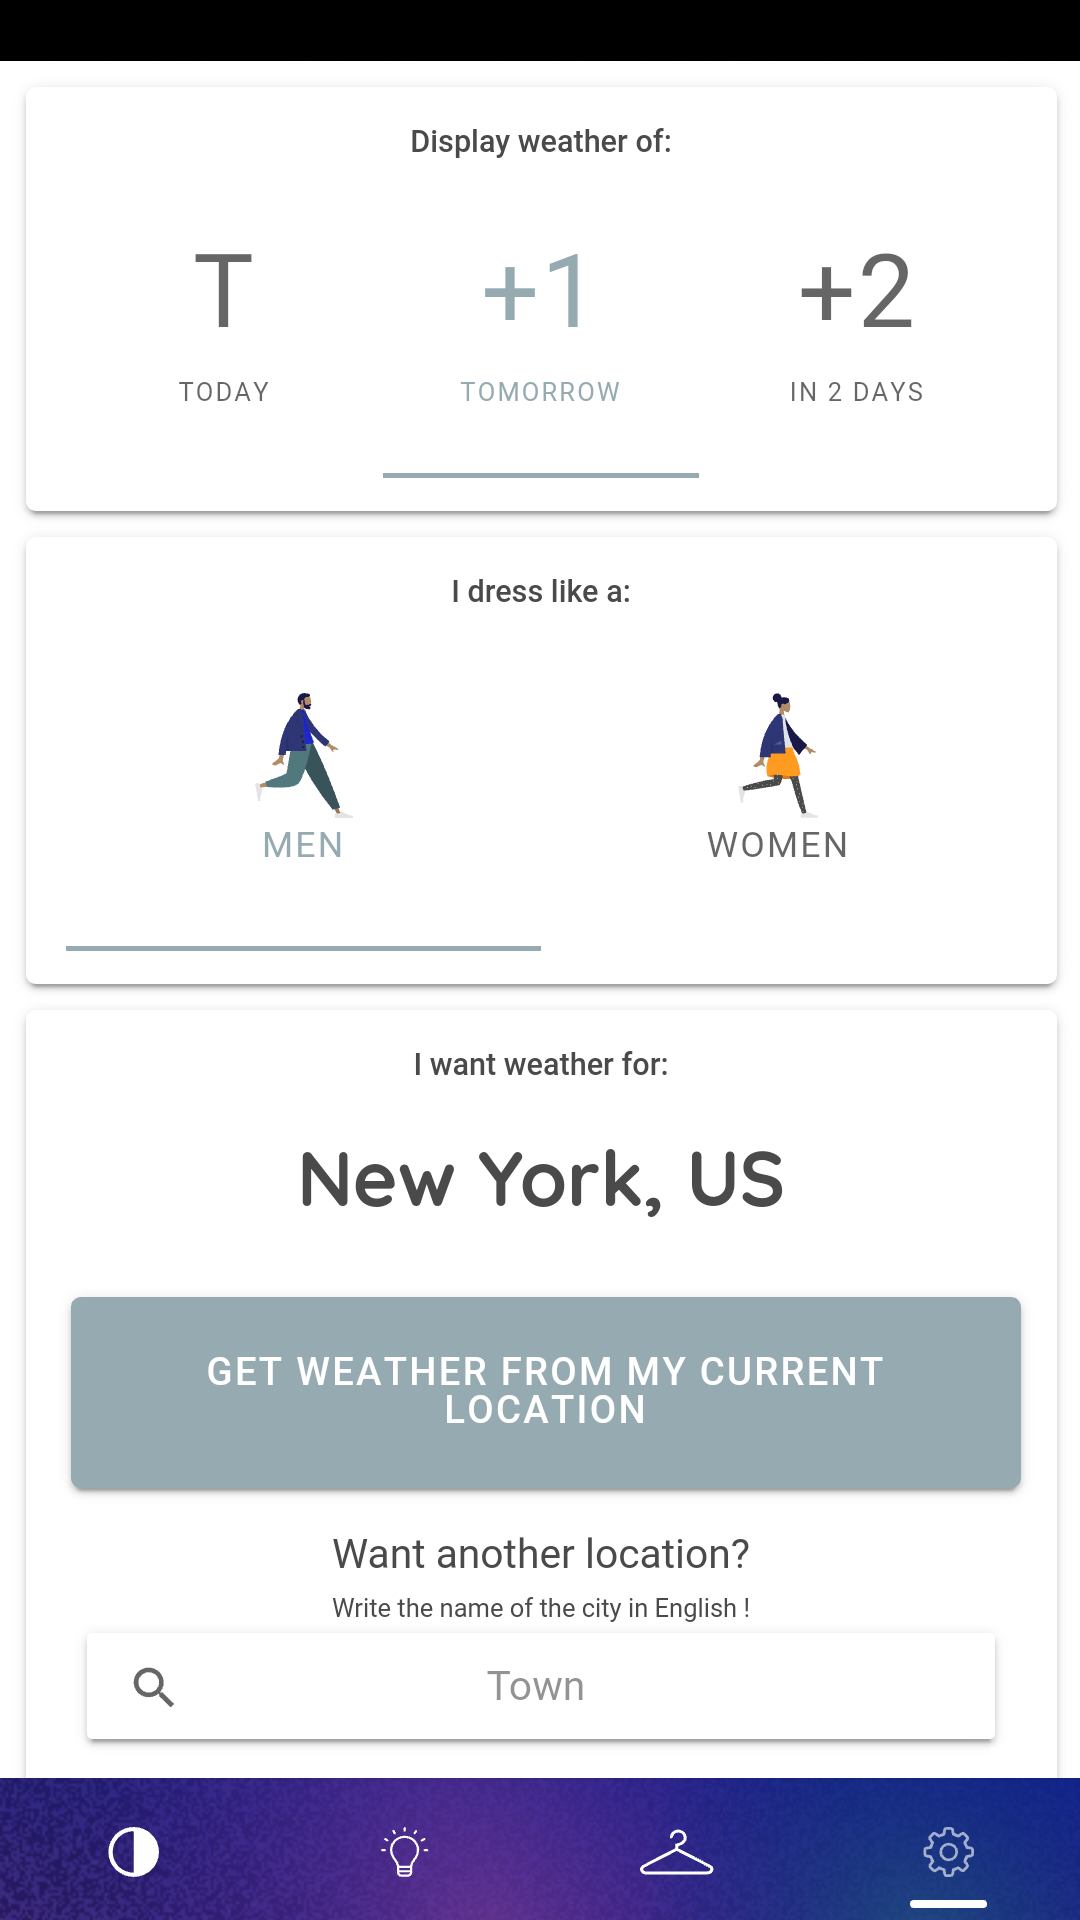 Get weather based fashion advice from Fashion Frog